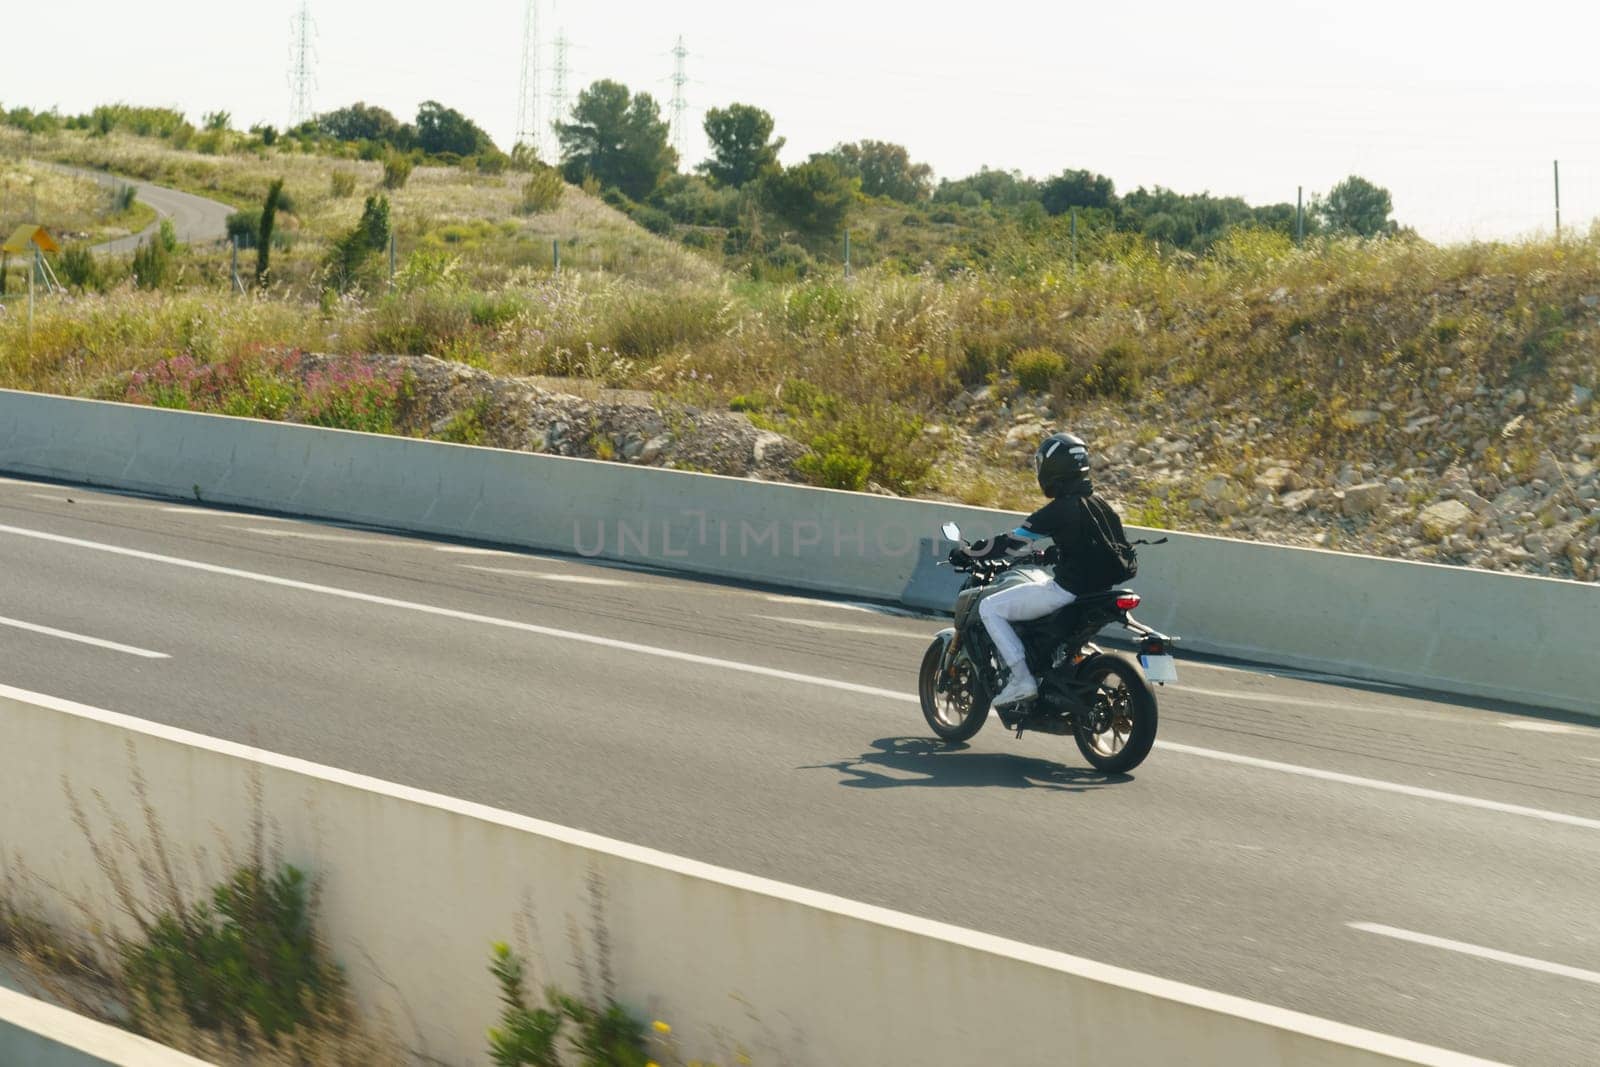 Salles-d'Aude, France - May 16, 2023: A person is riding a motorcycle on a highway, moving swiftly between lanes with traffic in the background.